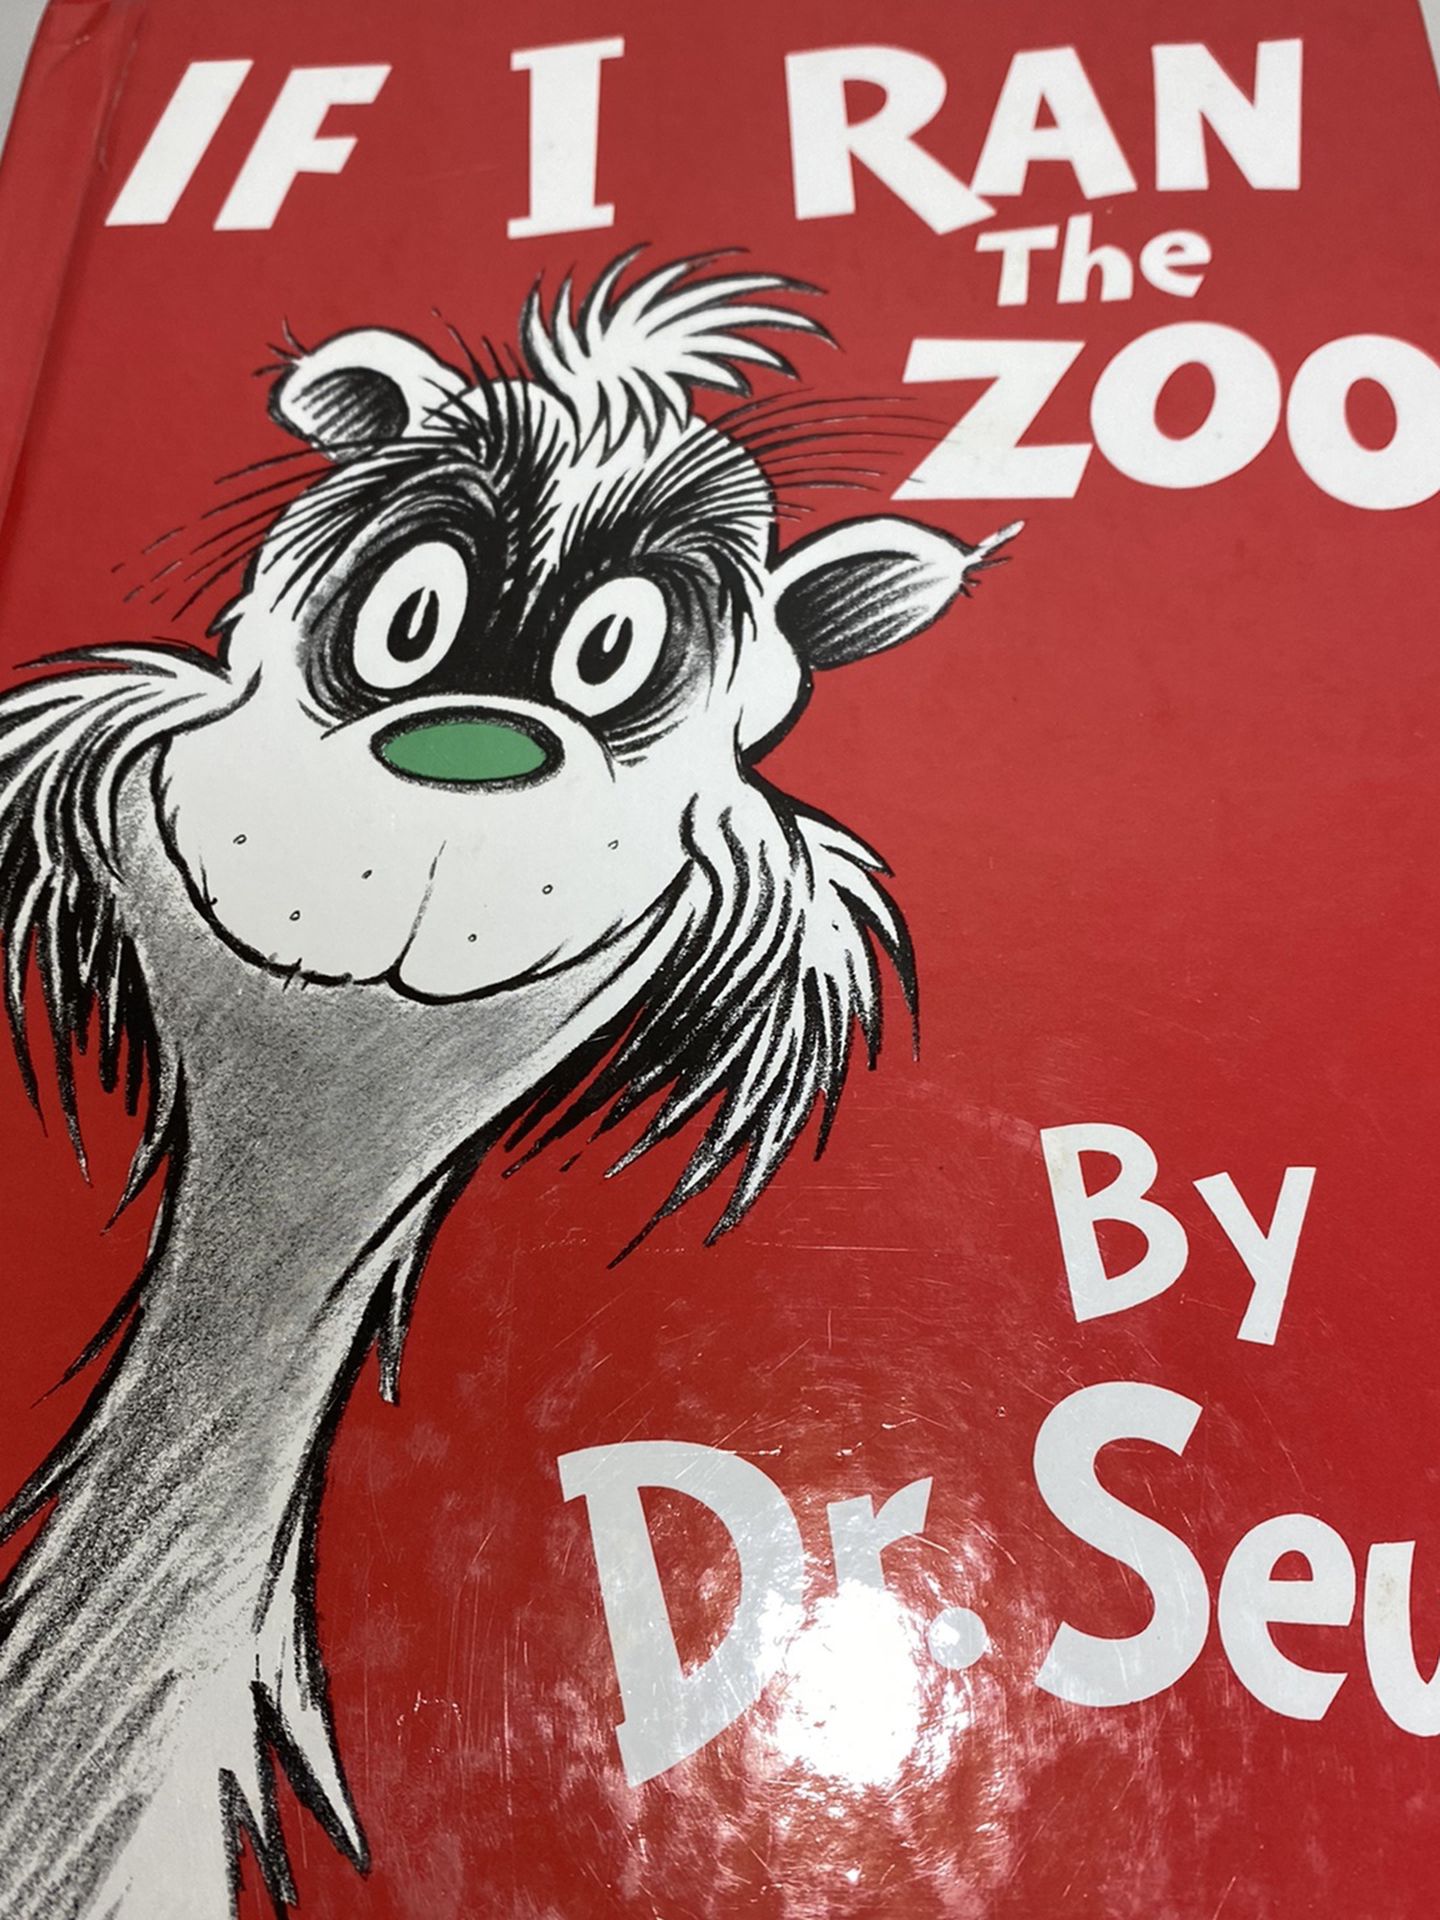 If I ran the zoo by Dr. Seuss book